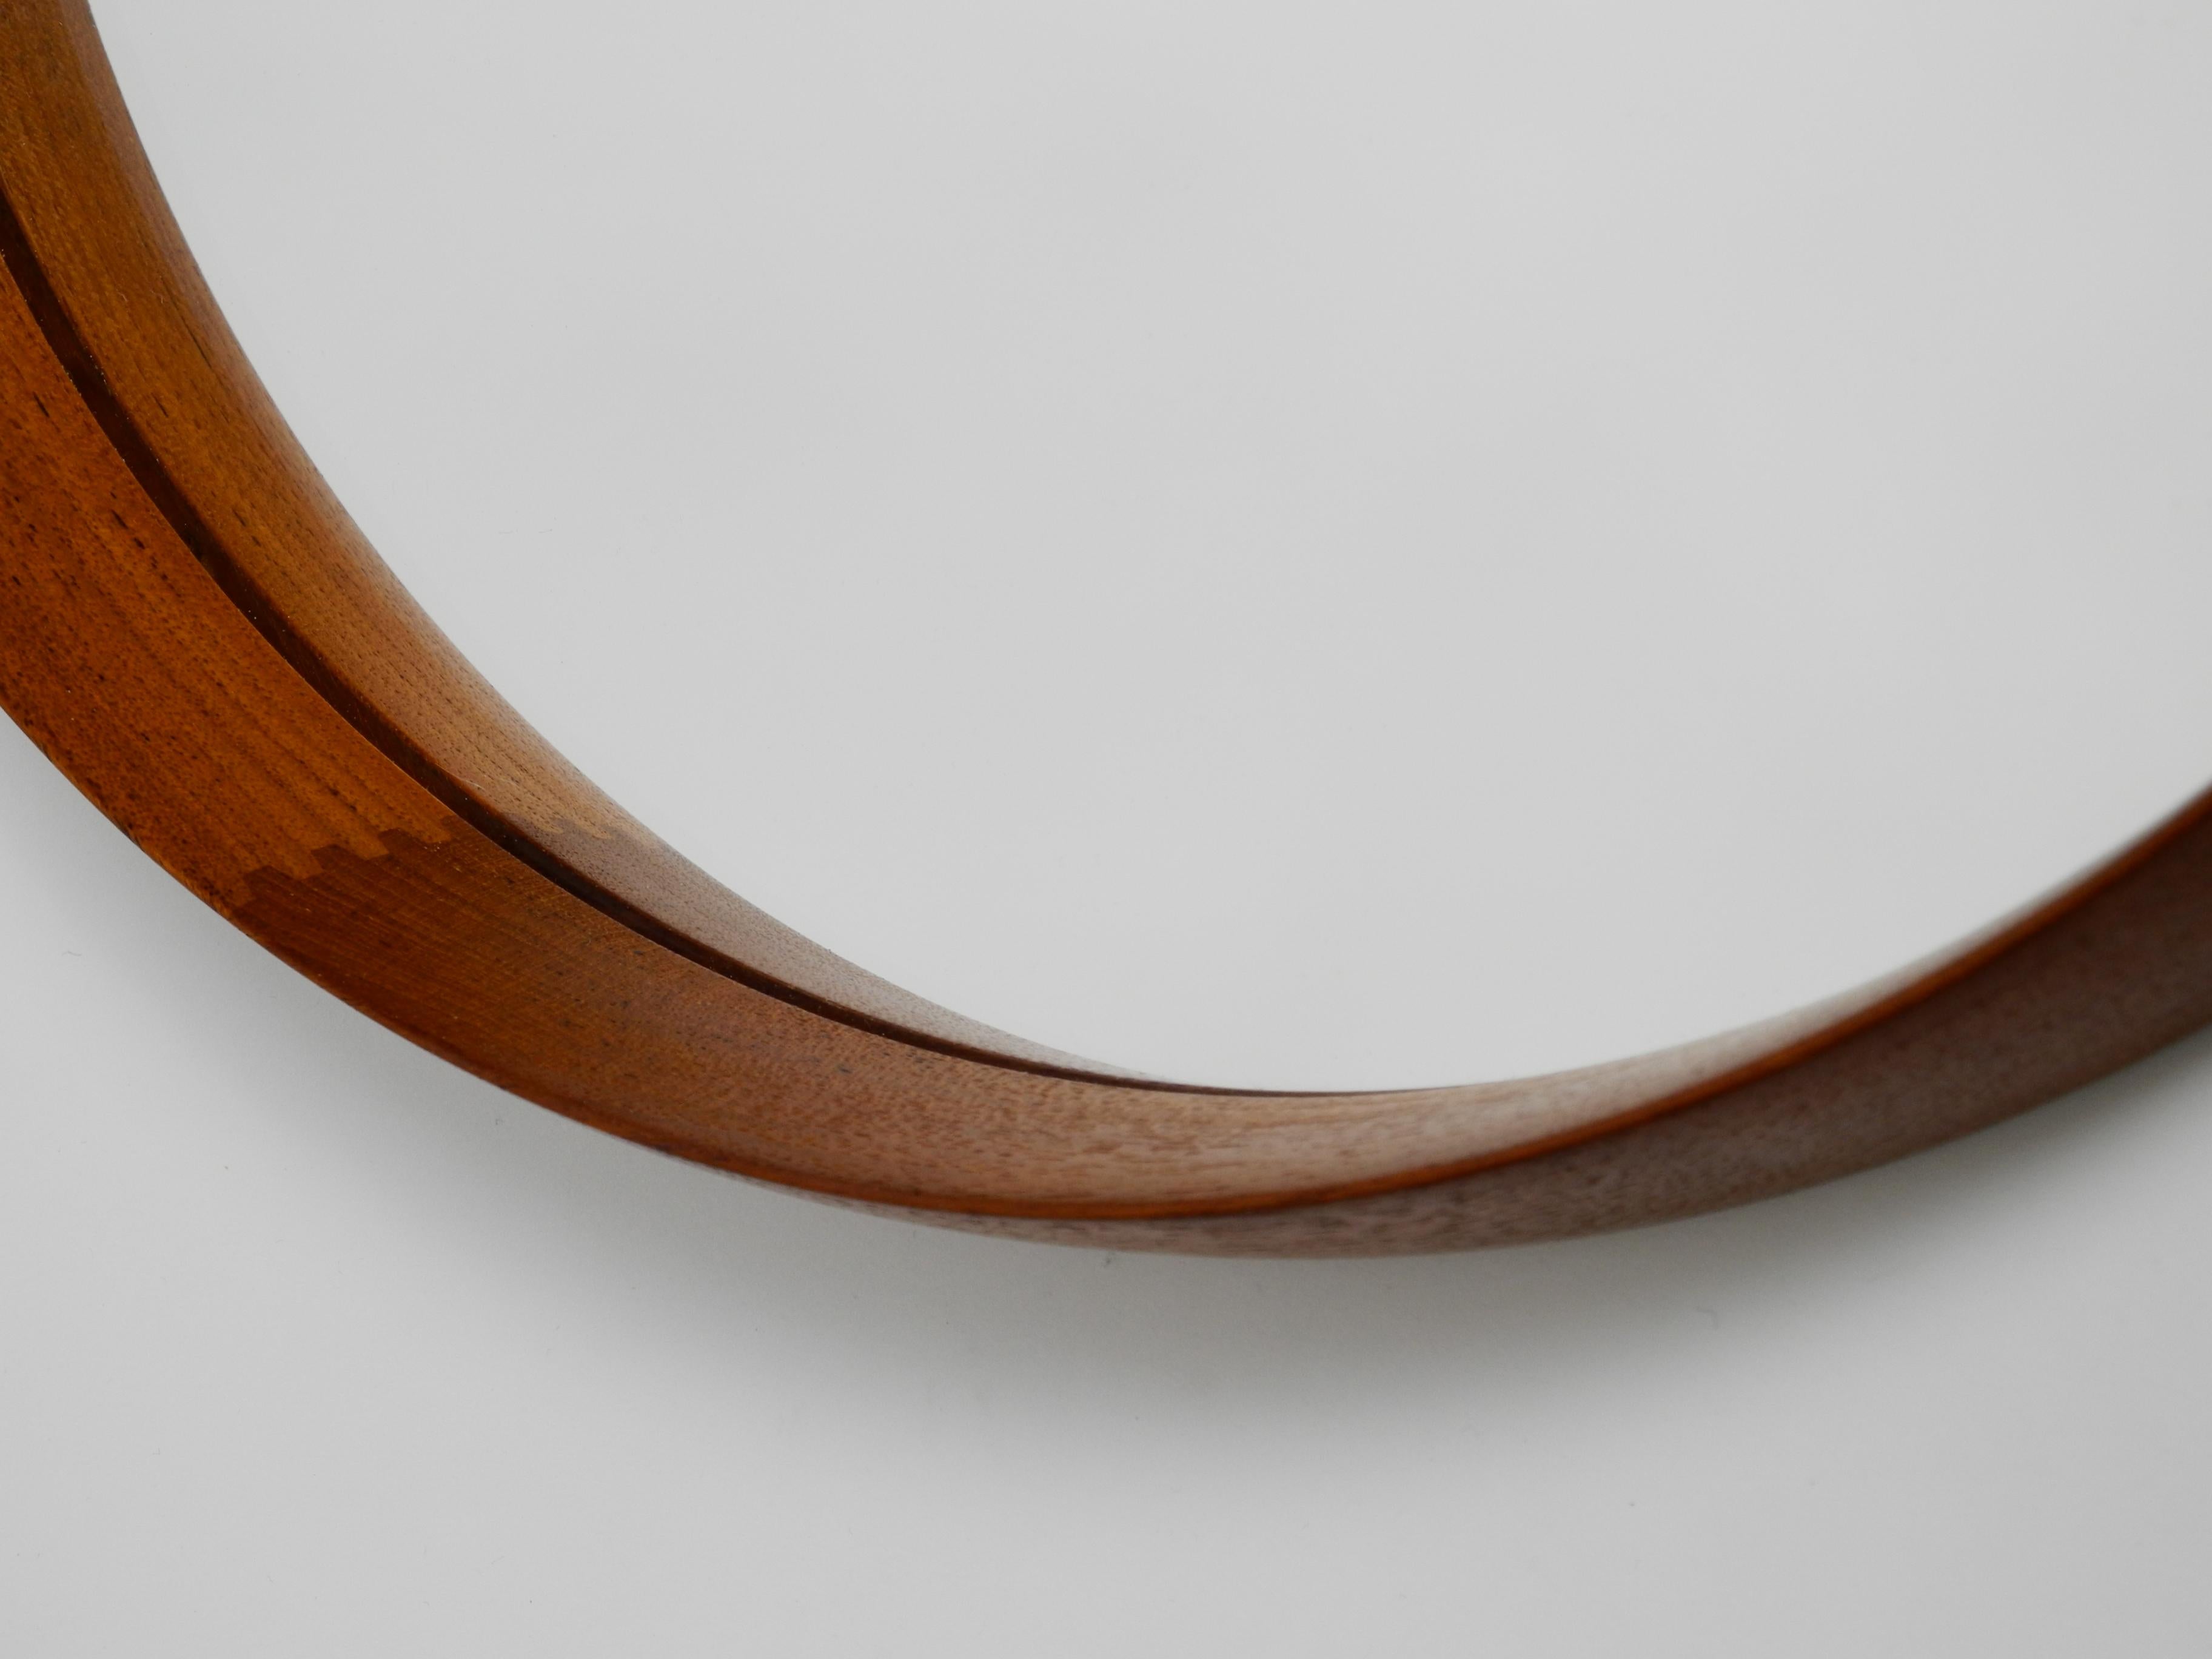 Mid-20th Century Round Teak Mirror with Leather Straps by Uno and Östen Kristiansson for Luxus For Sale